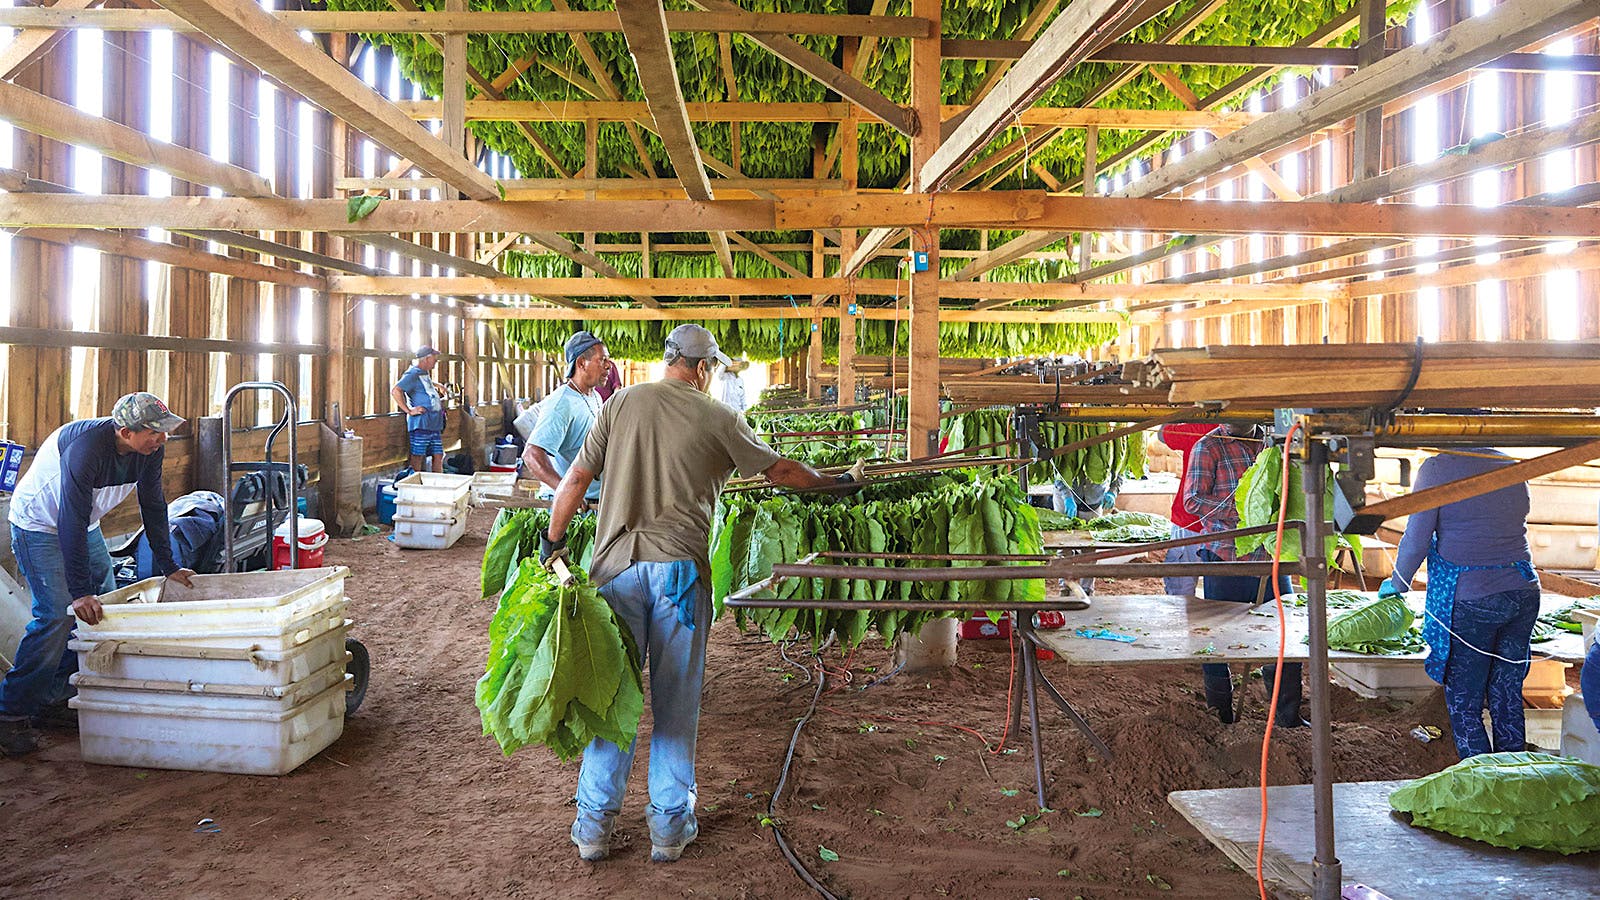 Shade leaves are gathered, sewn together and hung in barns.